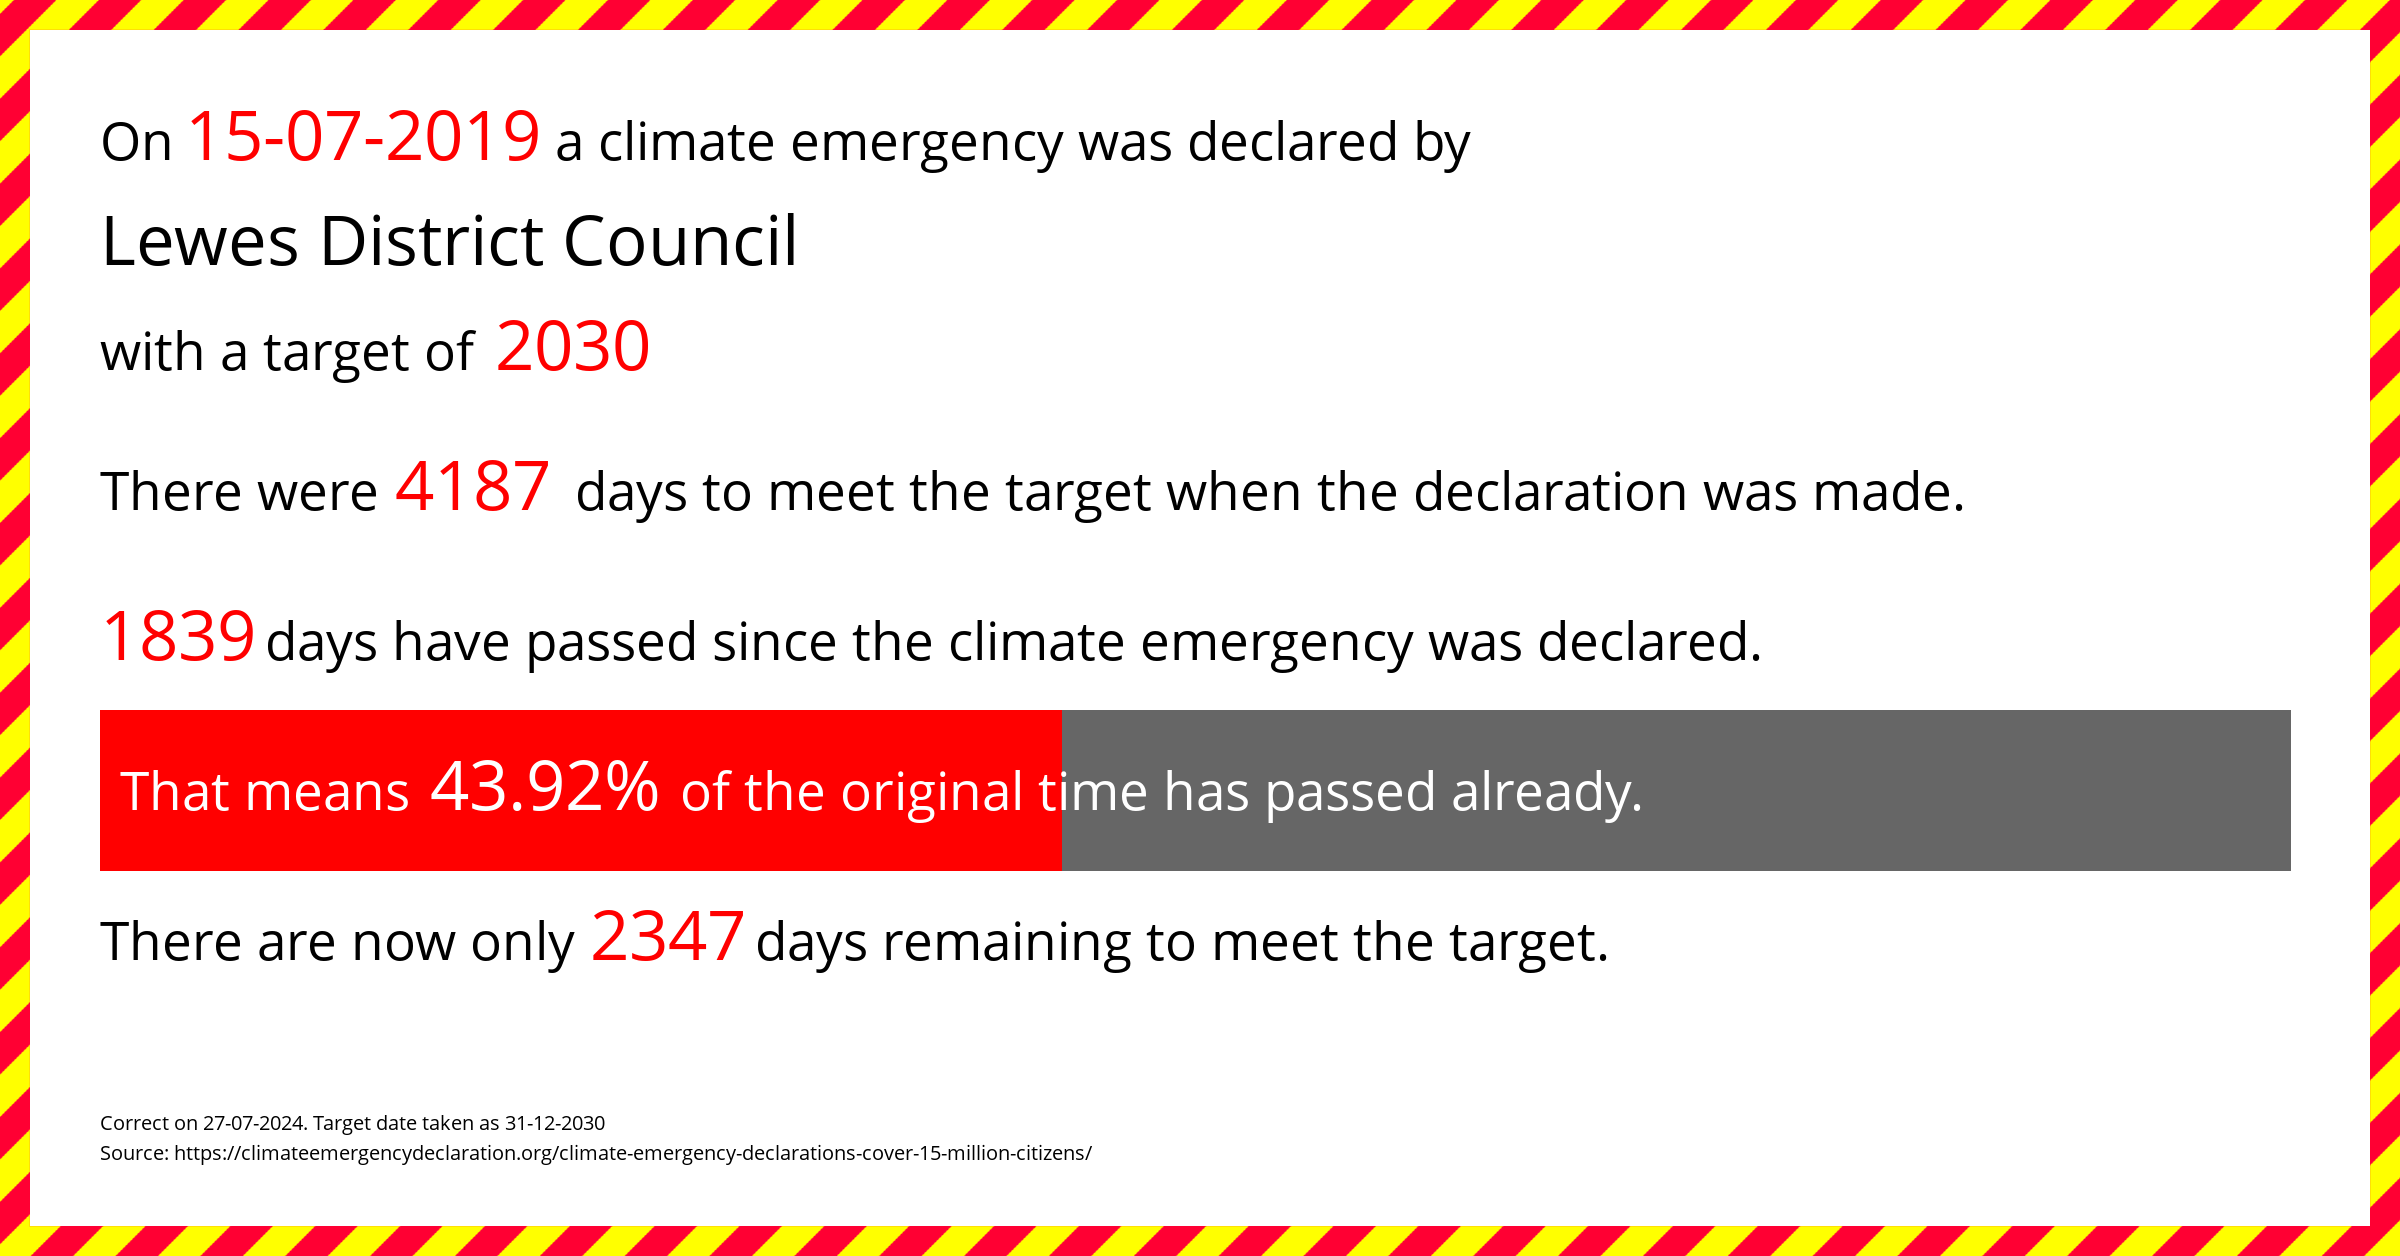 Lewes District Council declared a Climate emergency on Monday 15th July 2019, with a target of 2030.